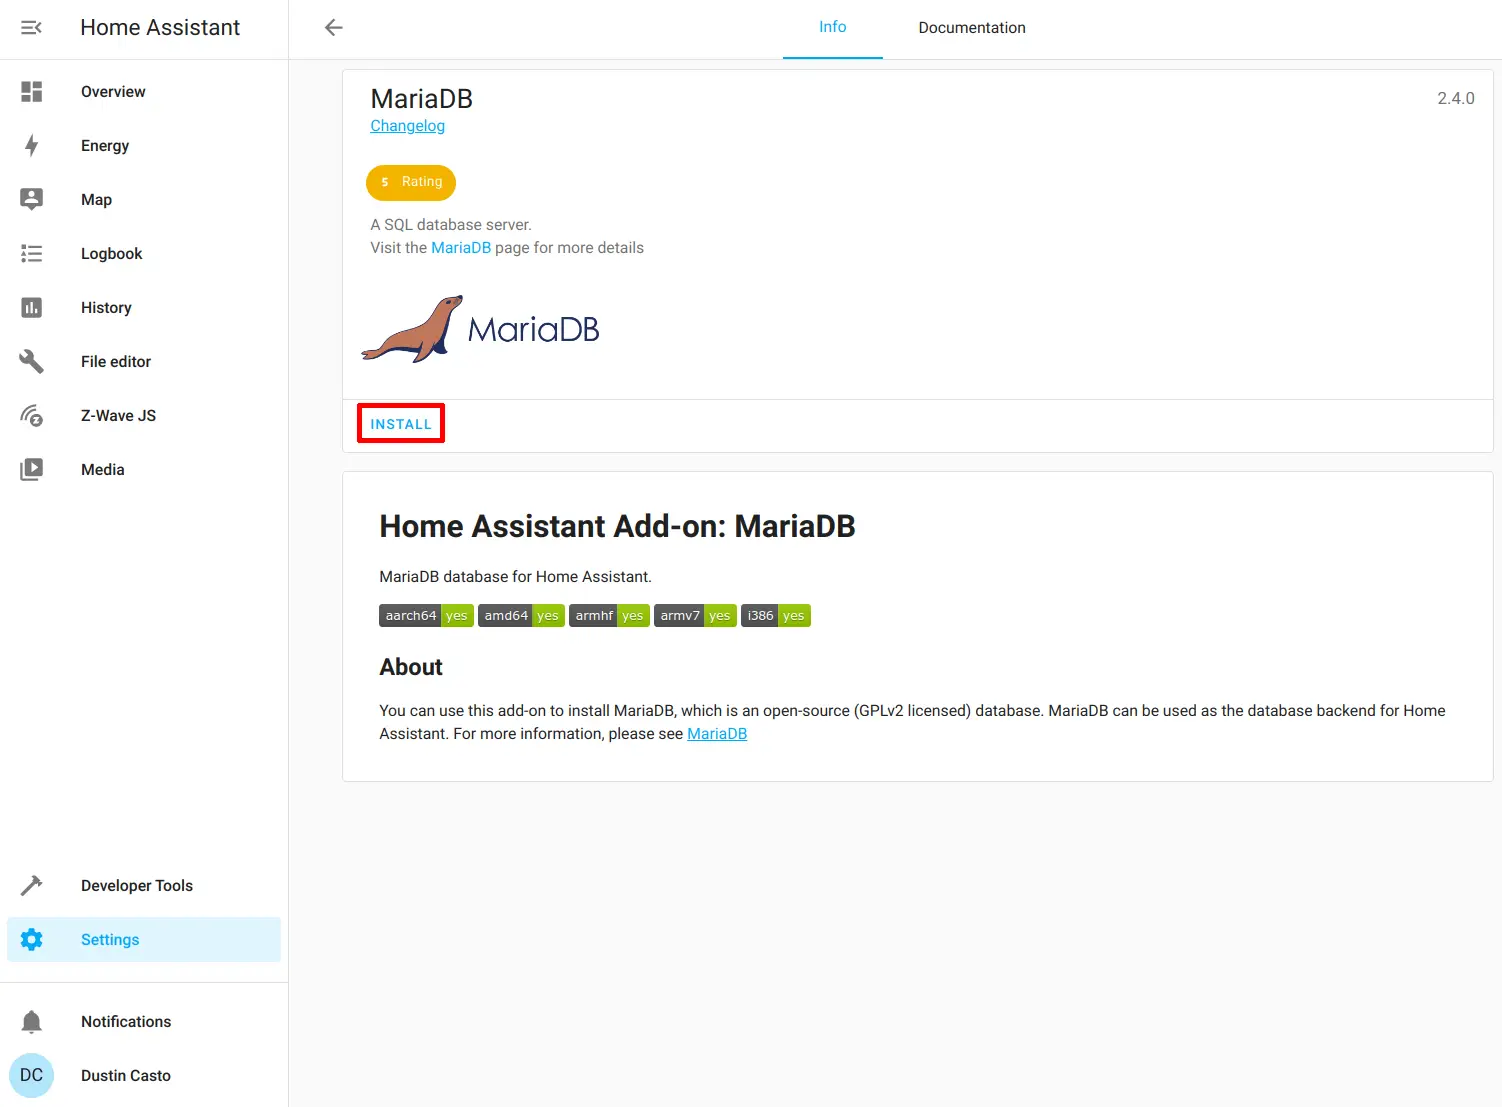 Home Assistant Install MariaDB